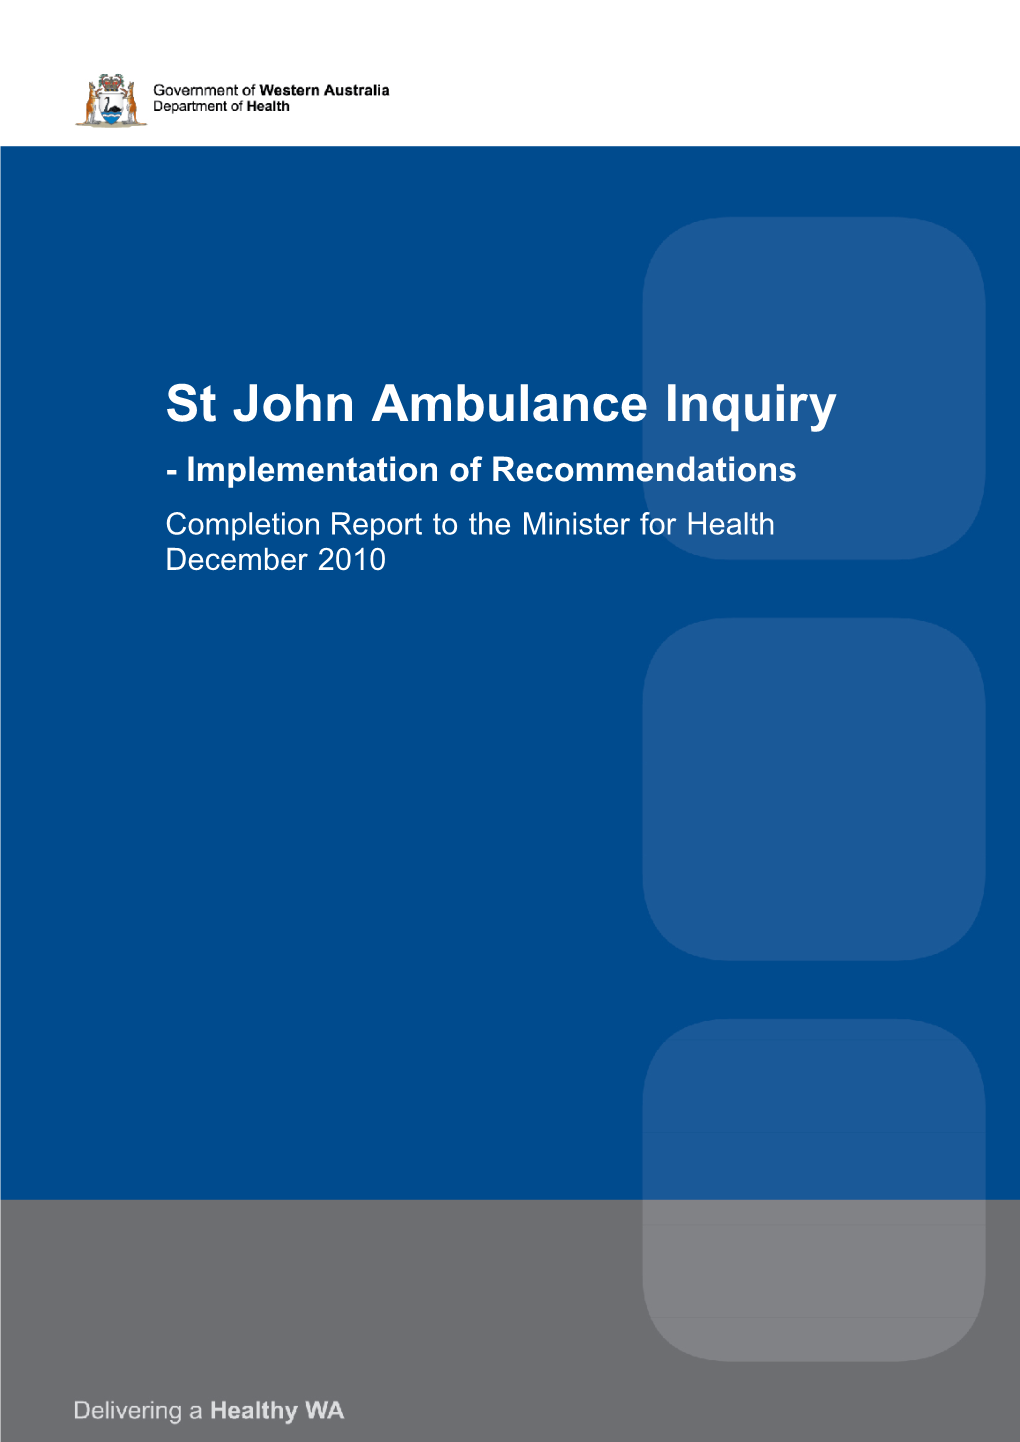 St John Ambulance Inquiry - Implementation of Recommendations Completion Report to the Minister for Health December 2010